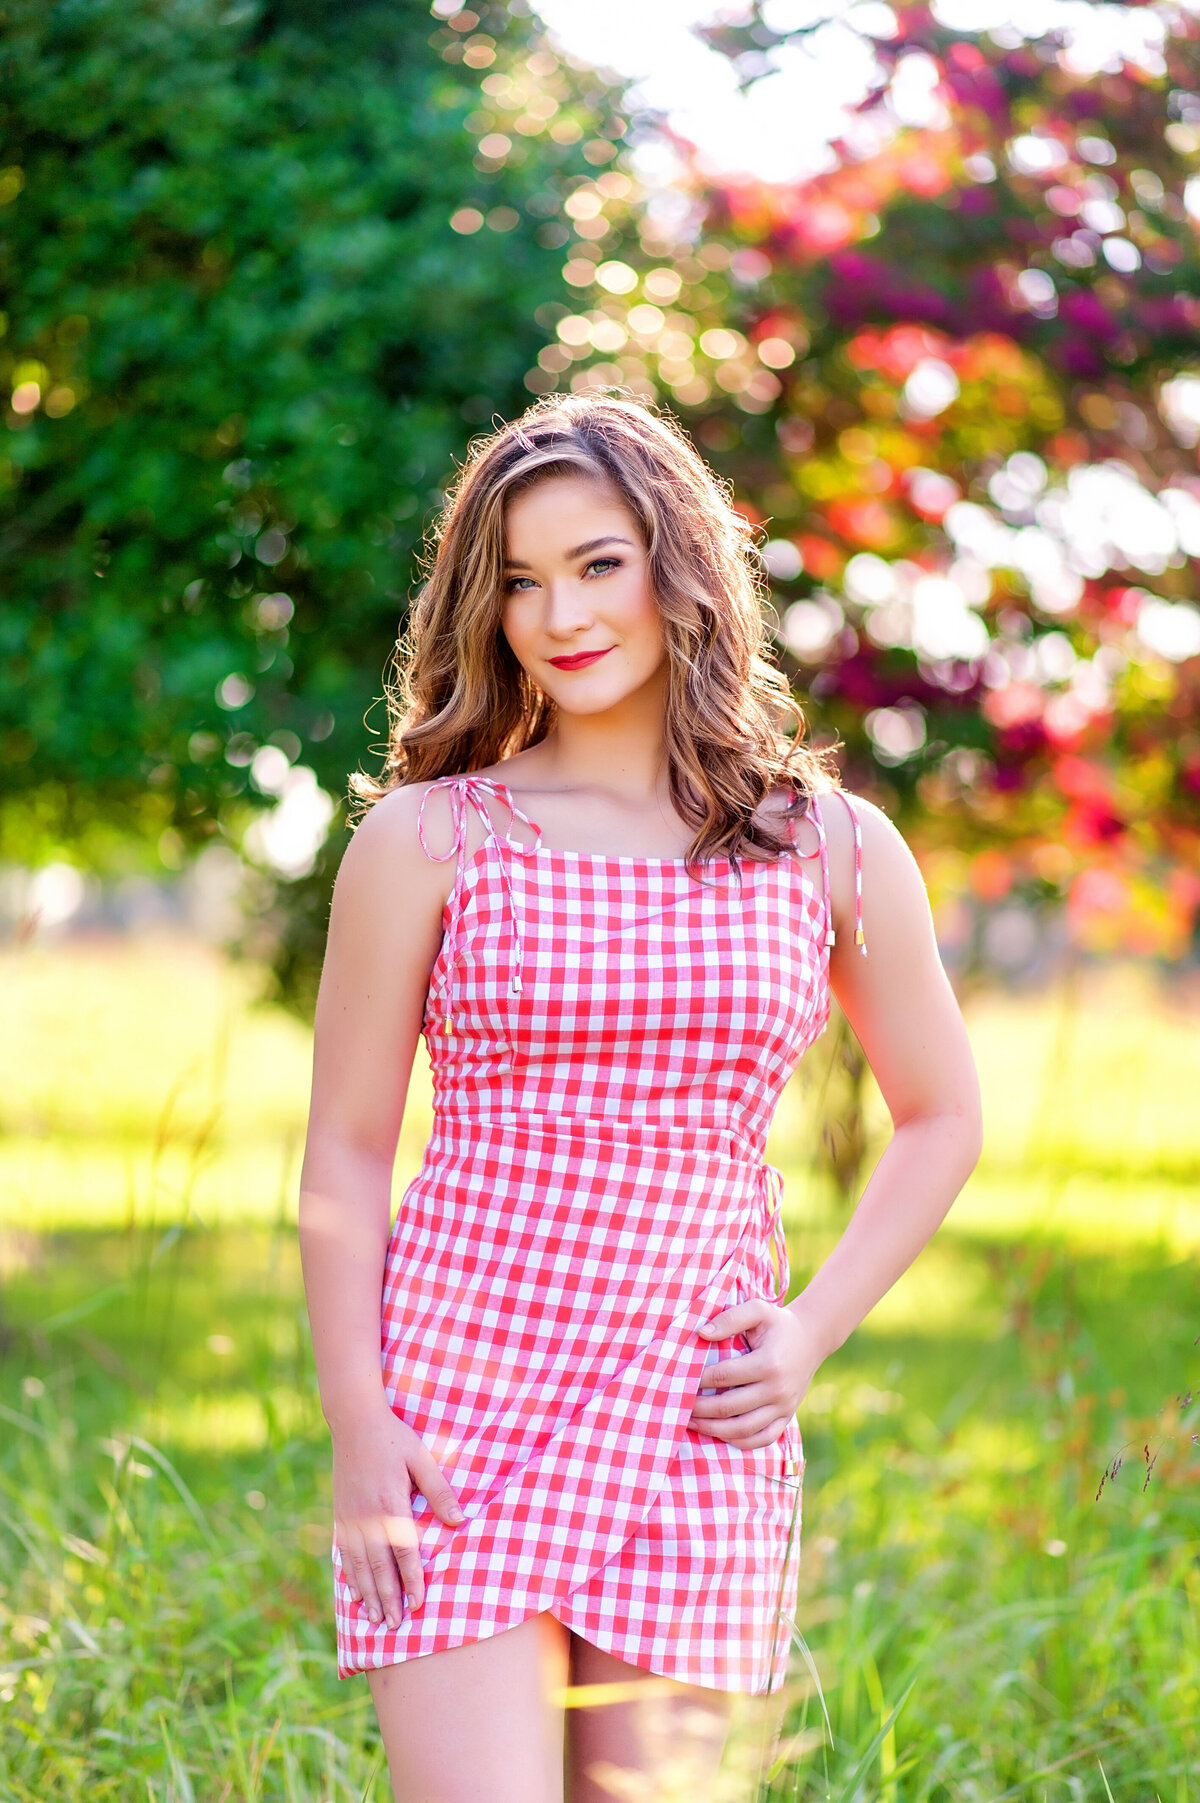 Mechanicsville high school senior girl poses in field wearing a red and white gingham dress.